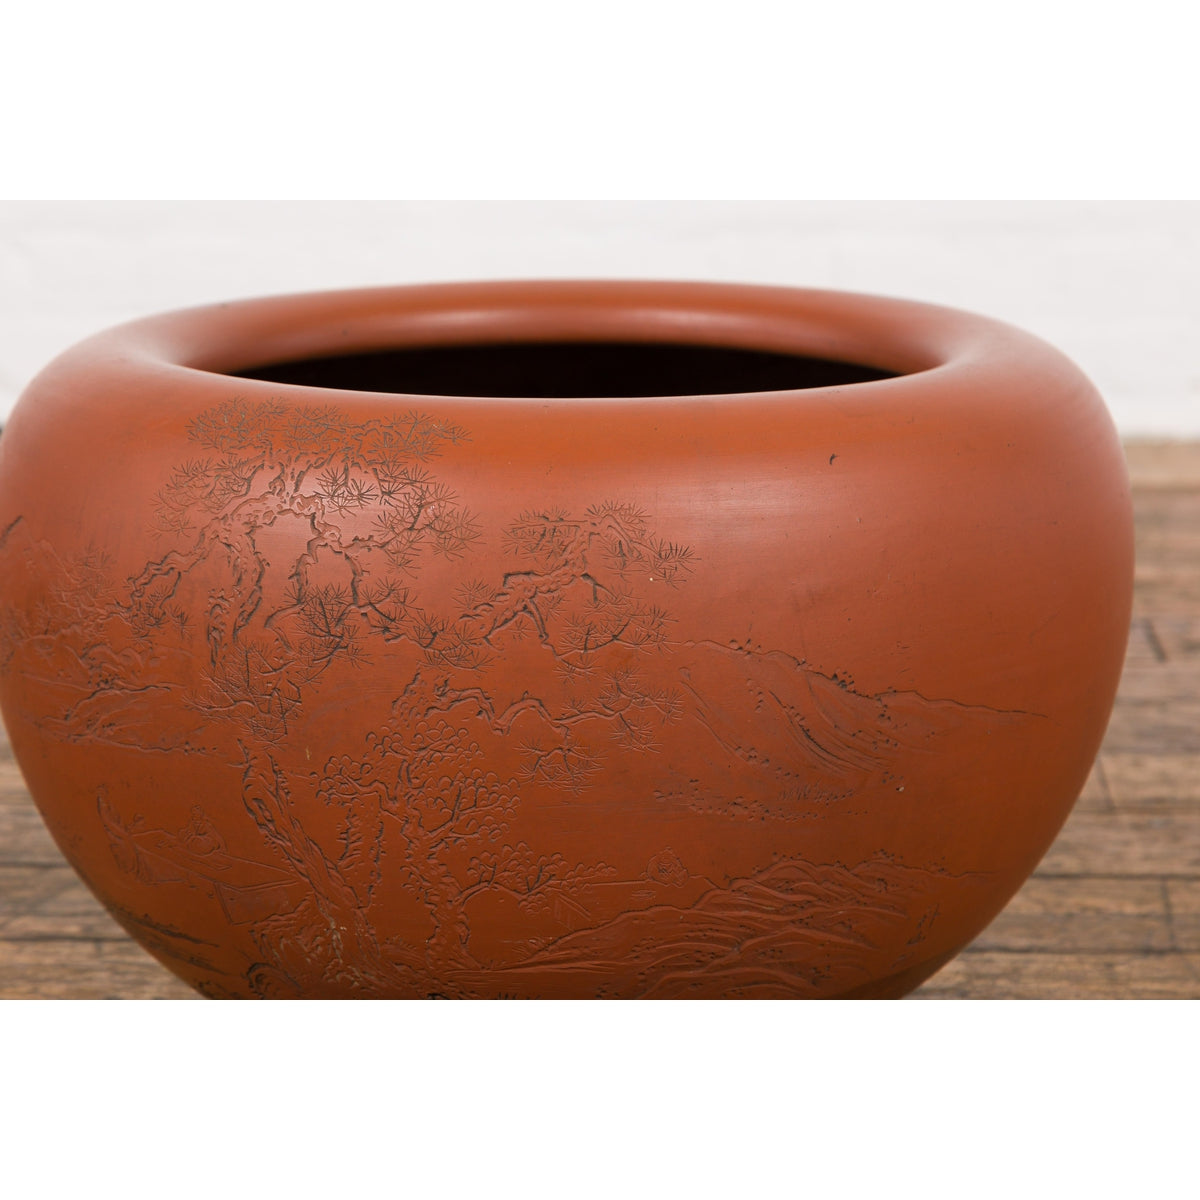 Orange Circular Antique Planter with Etched Design-YN7819-6. Asian & Chinese Furniture, Art, Antiques, Vintage Home Décor for sale at FEA Home